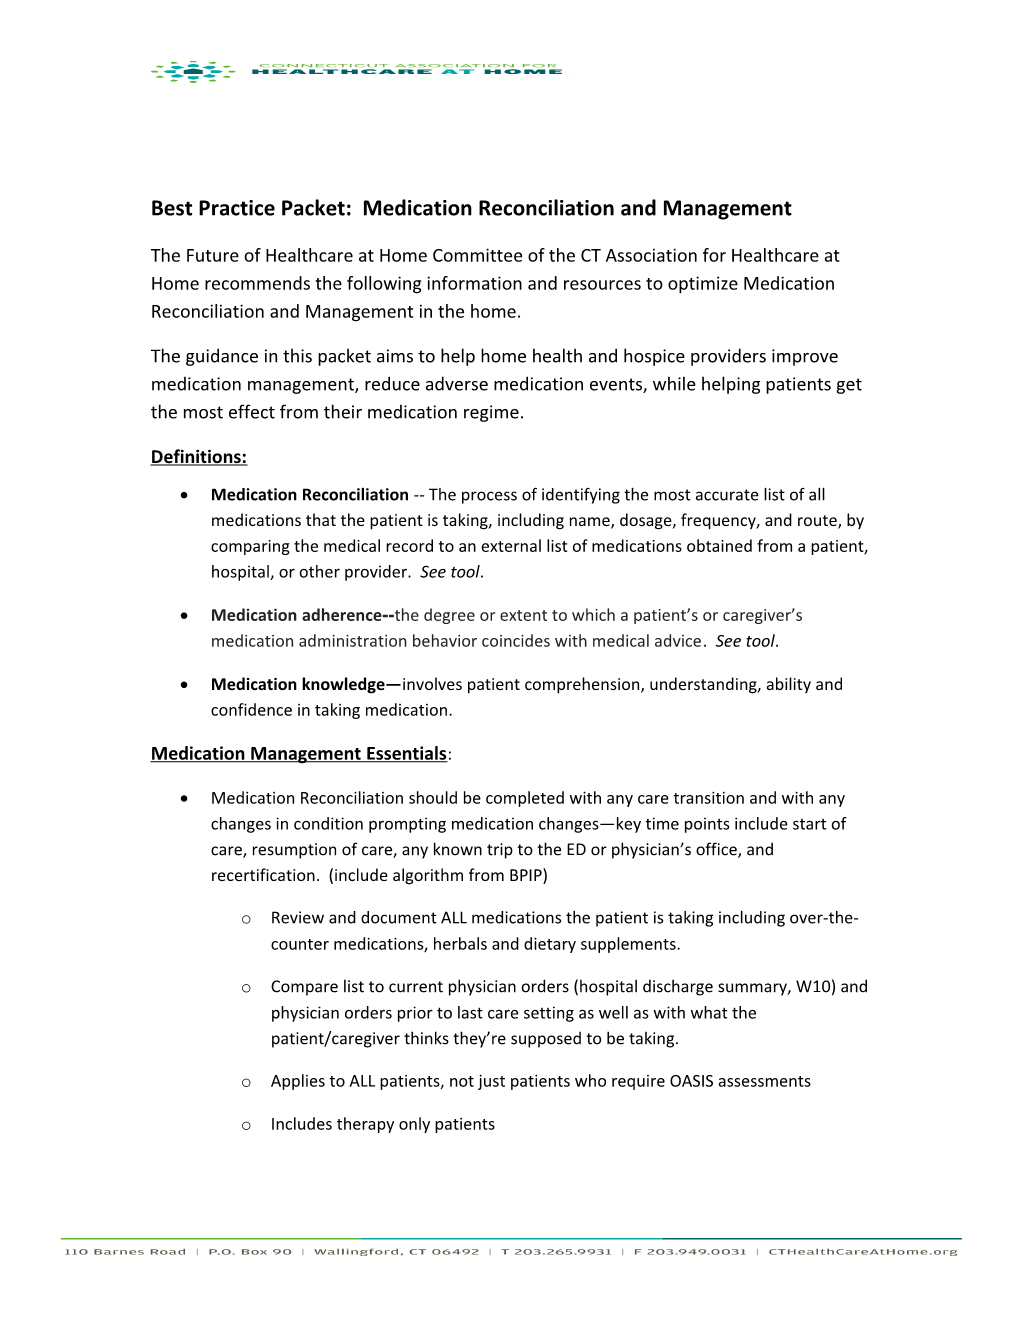 Best Practice Packet: Medication Reconciliation and Management